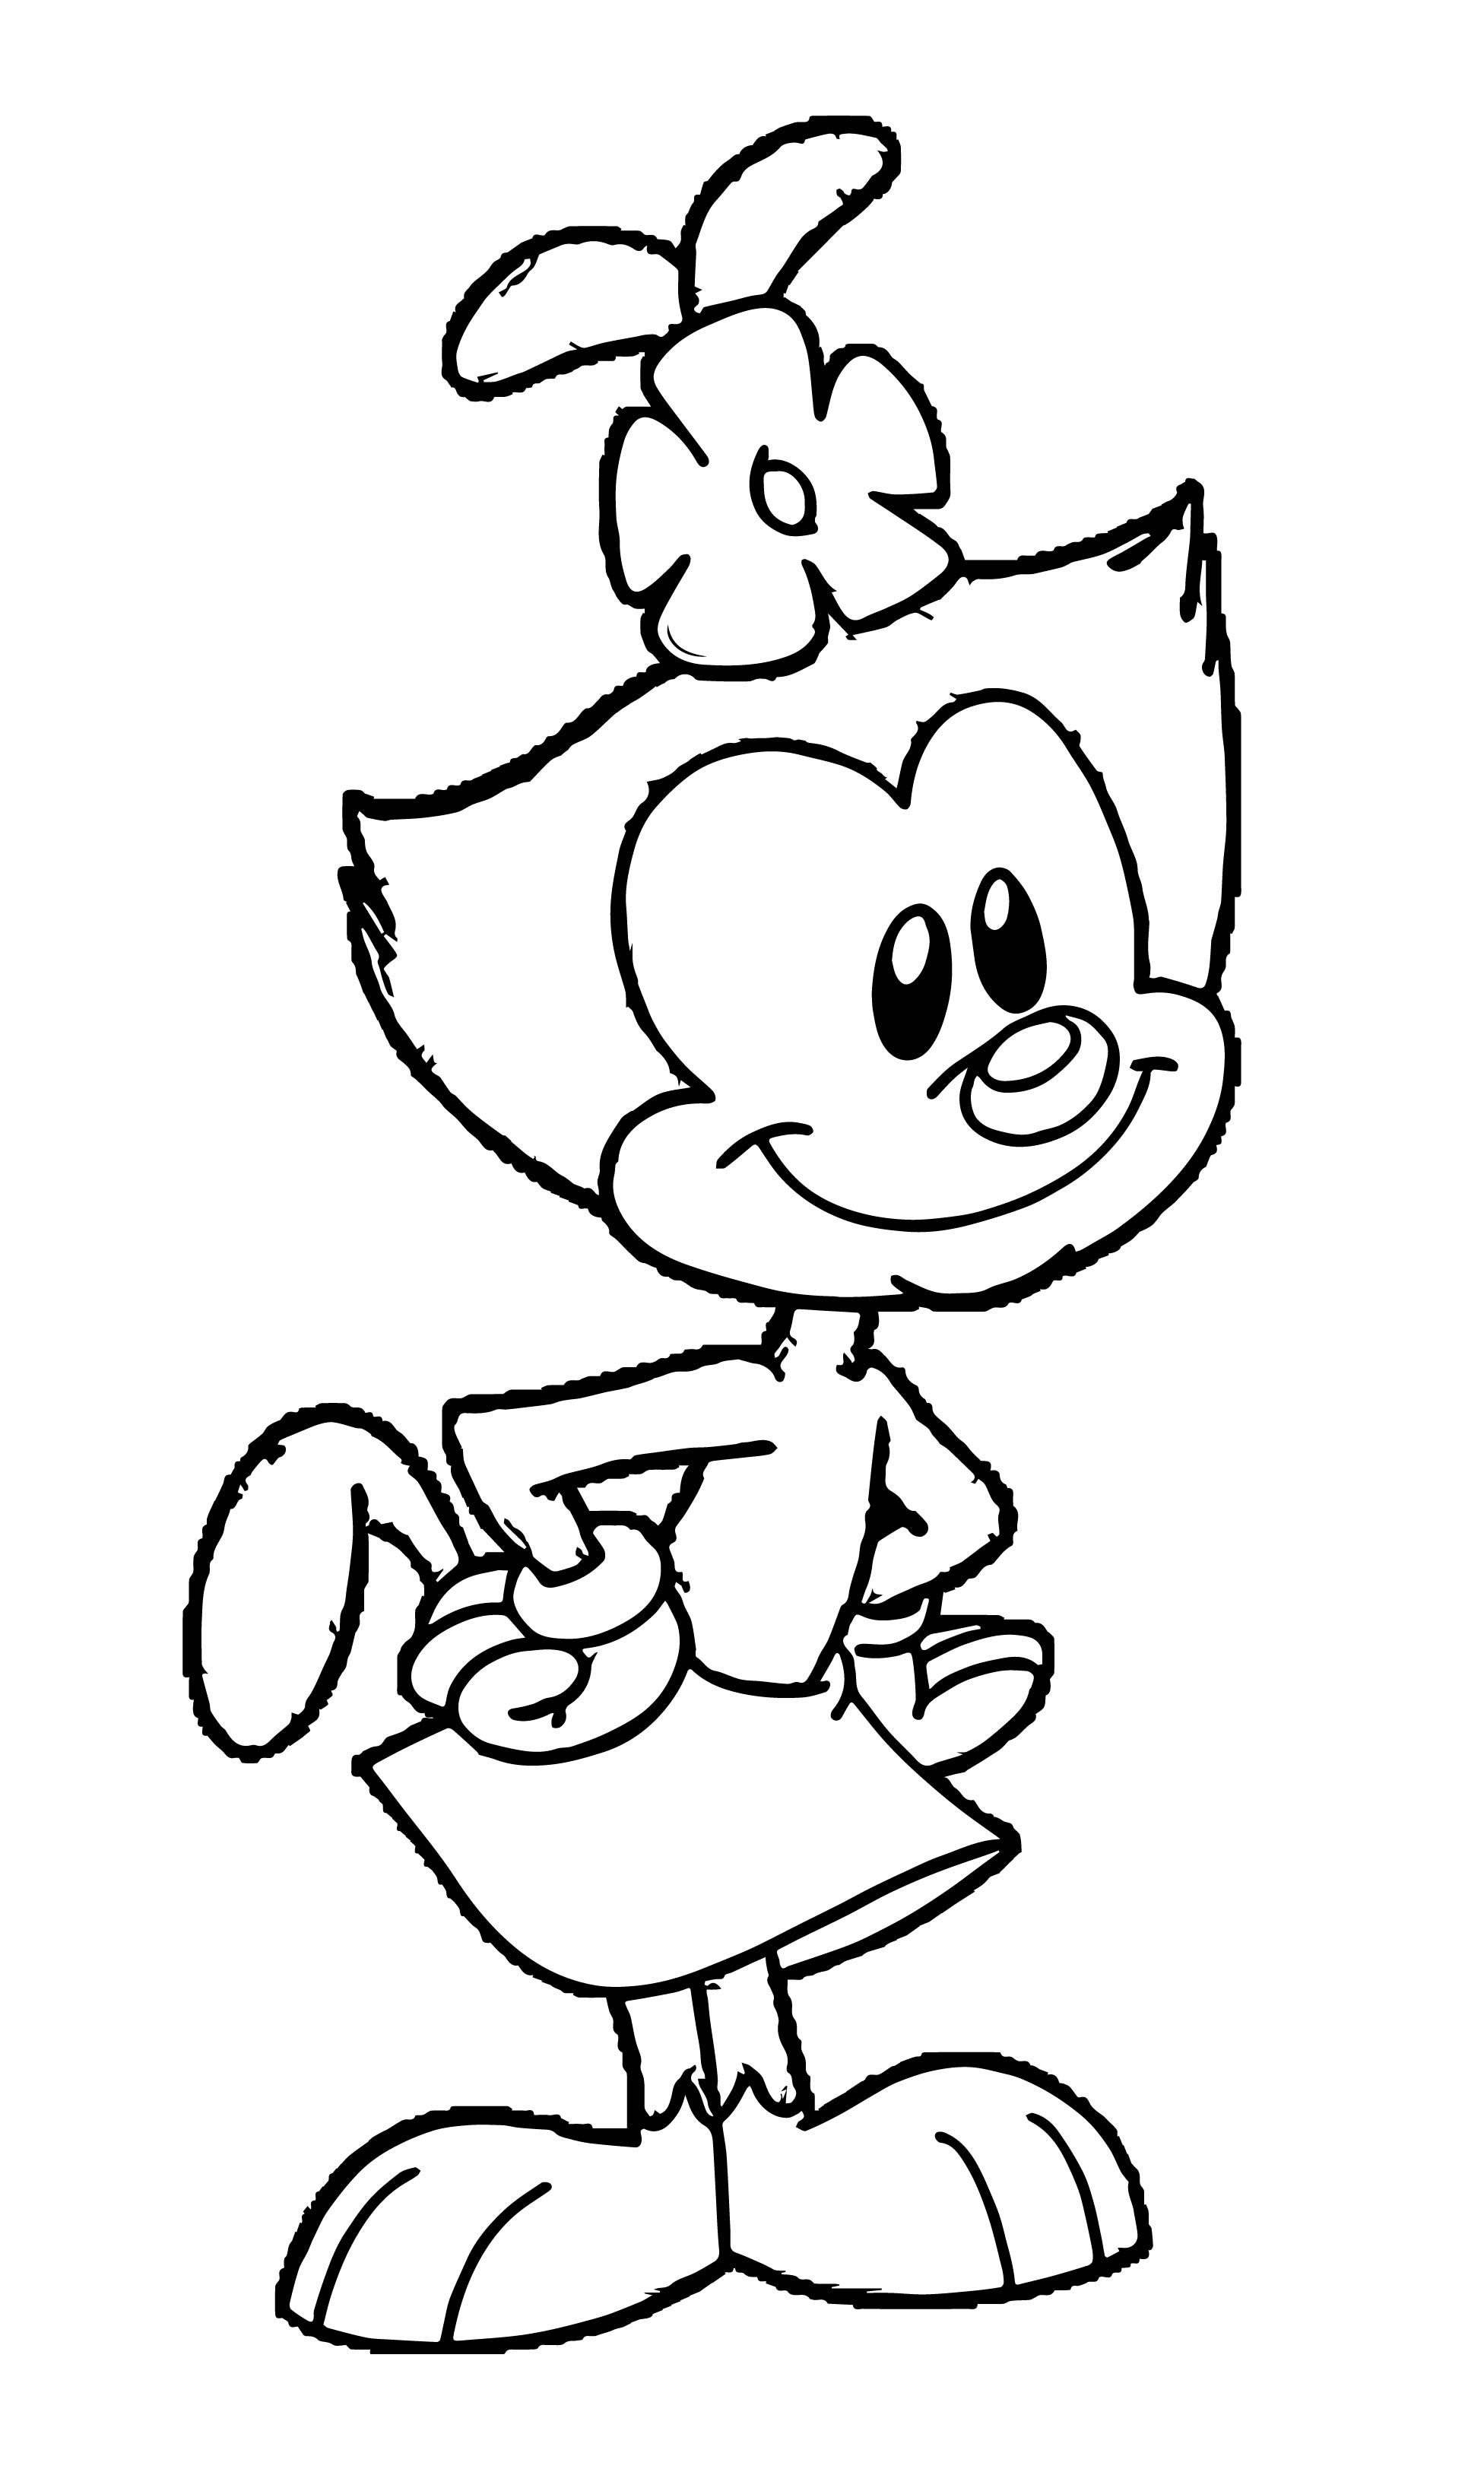 Printable Animaniacs Coloring Pages Pdf For Kids - Animaniacs Coloring Pages to Print